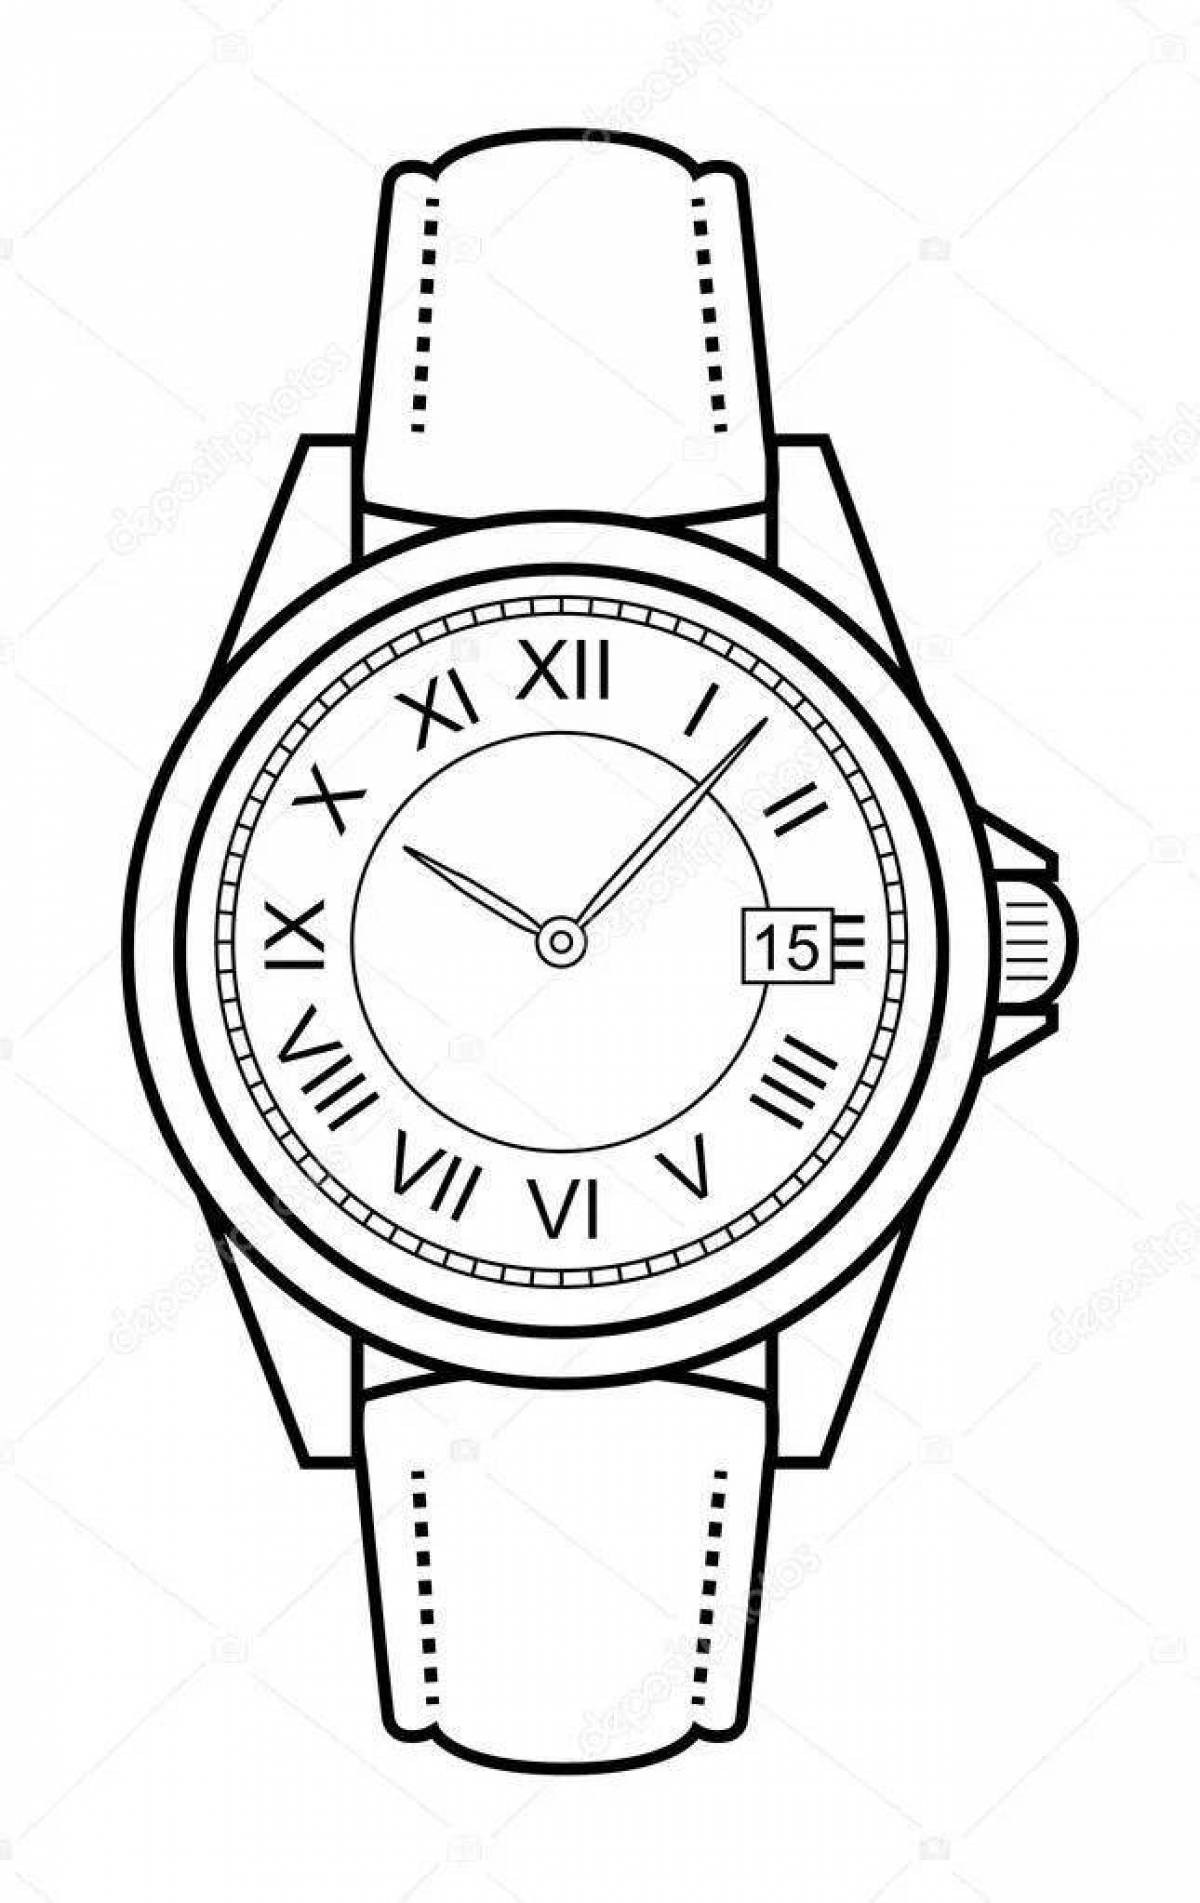 Fun watch coloring page